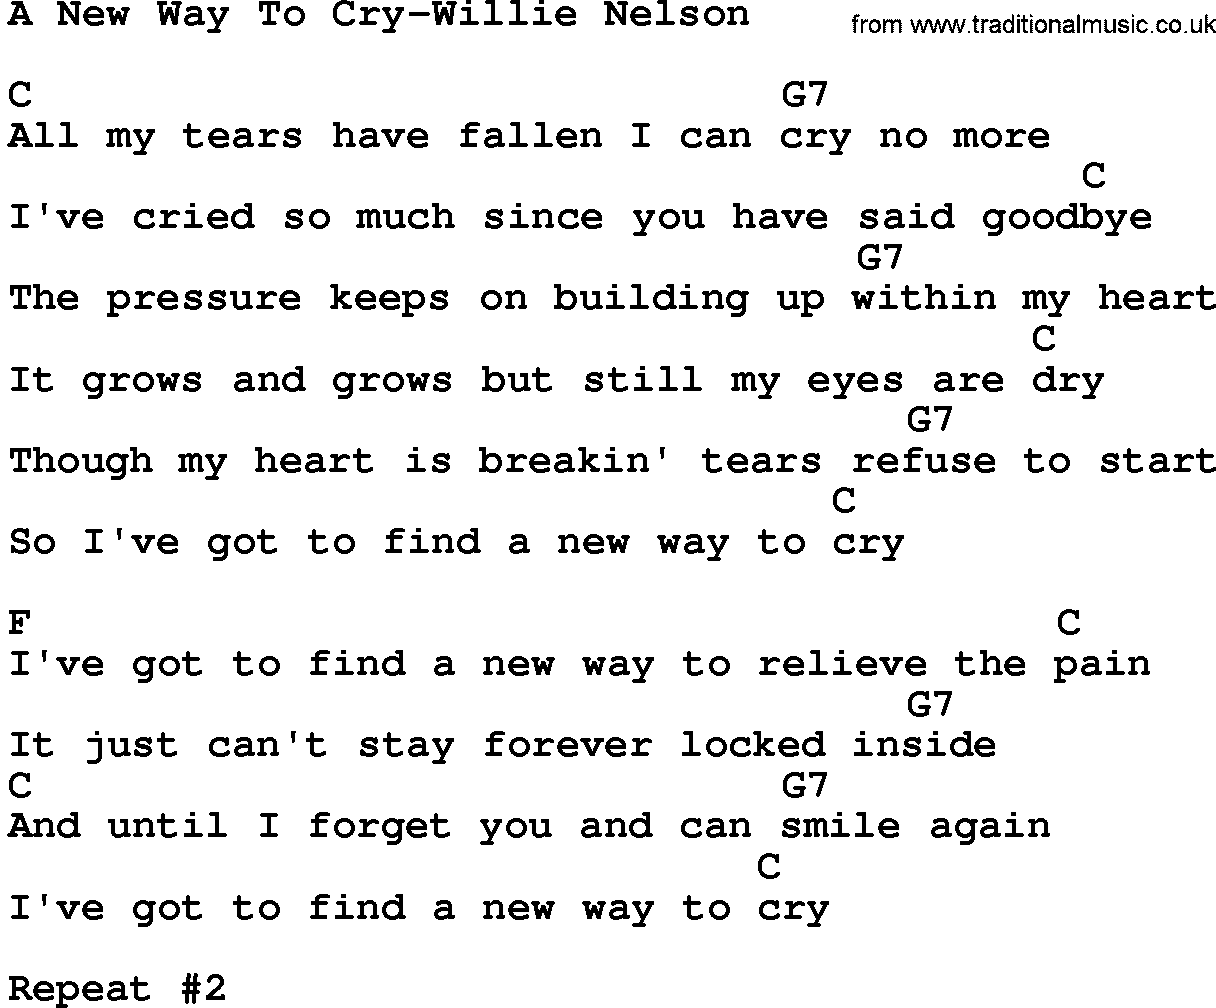 Country music song: A New Way To Cry-Willie Nelson lyrics and chords